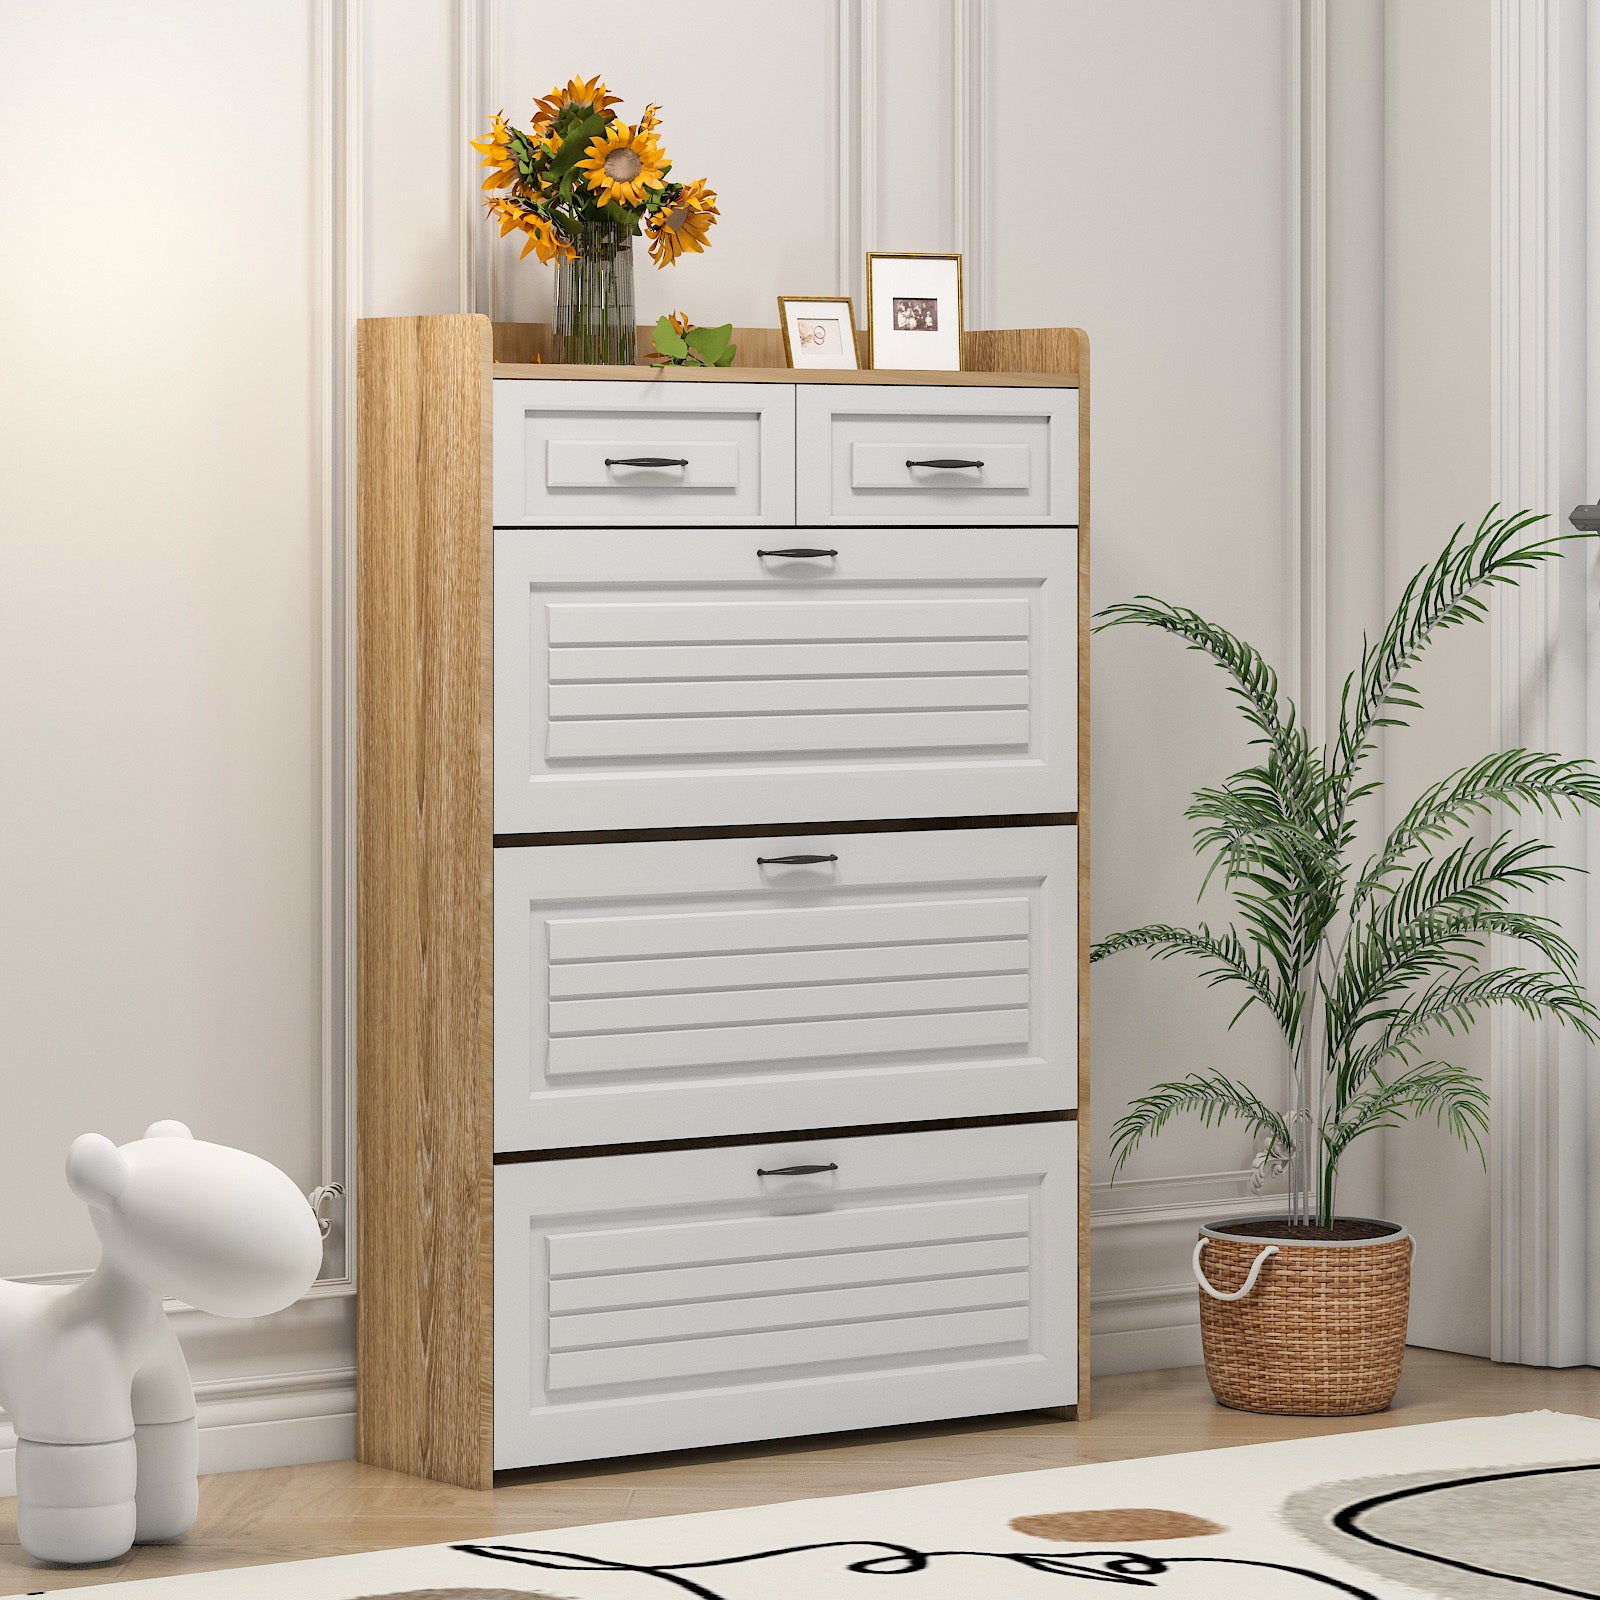 1250 White Oak Color Shoe Cabinet With 3 Doors 2